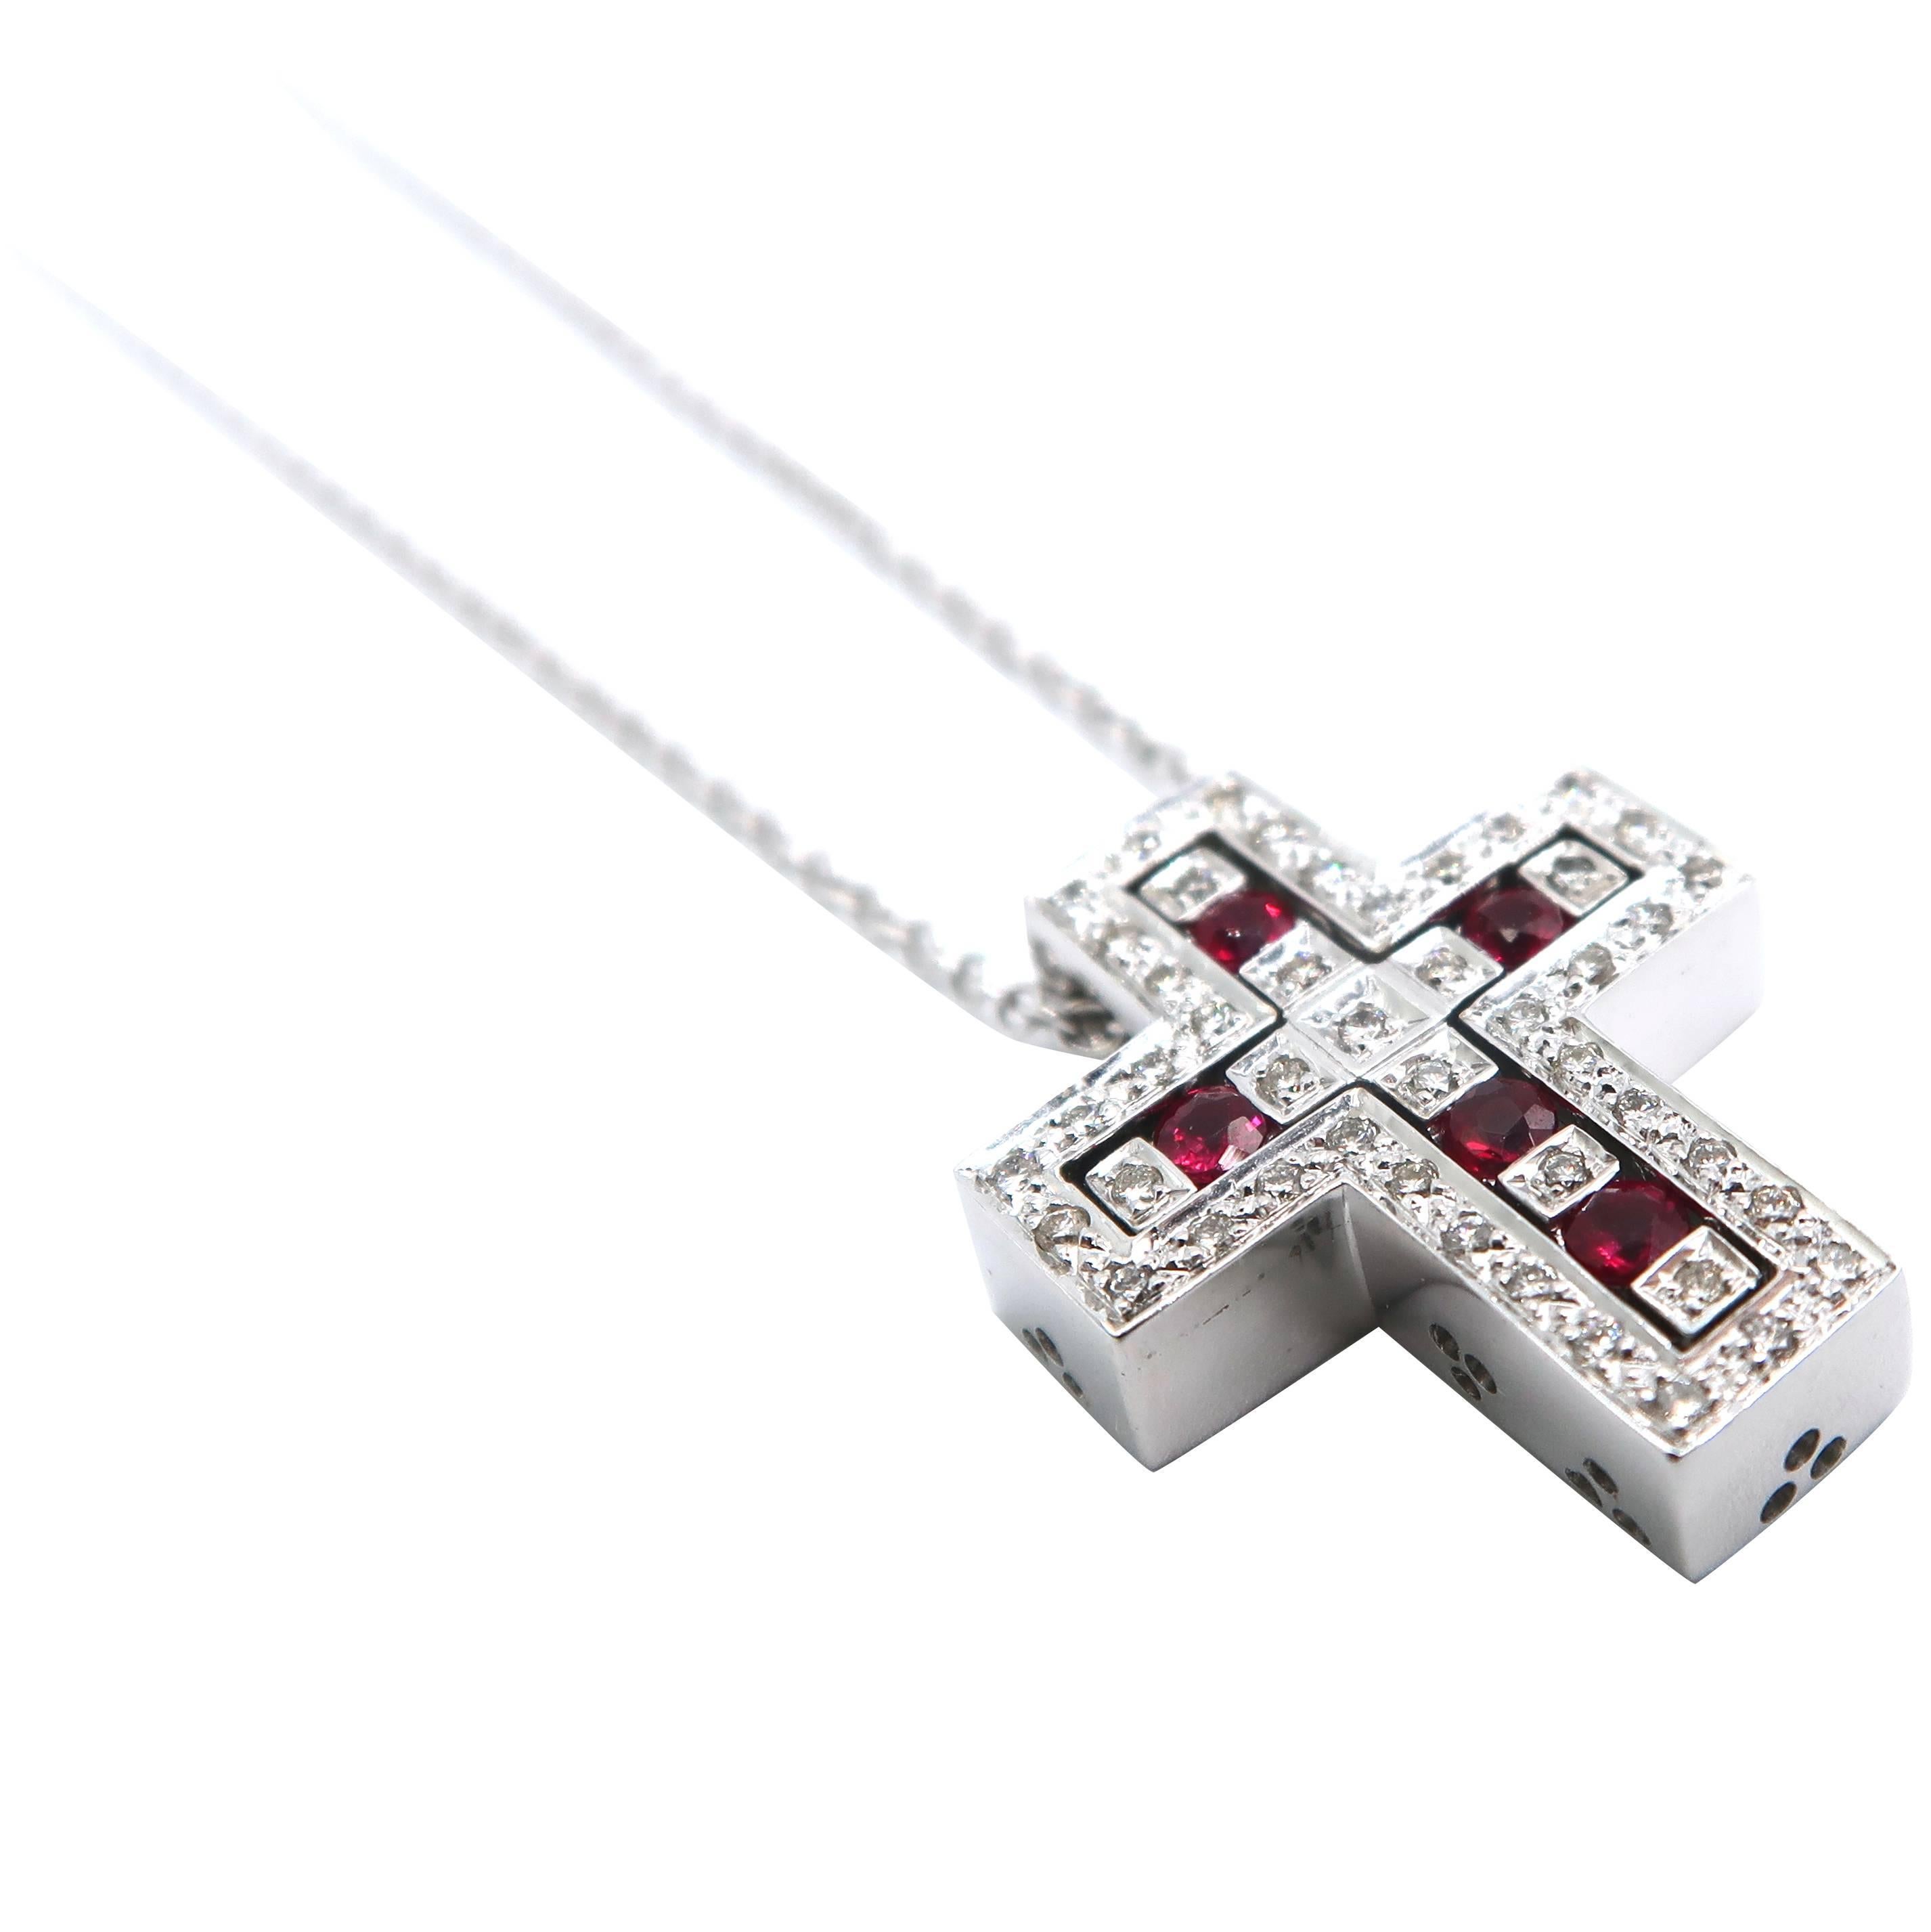 2 Cross Pendants Combinable Joinable Splittable Diamond Ruby White Gold Chain For Sale